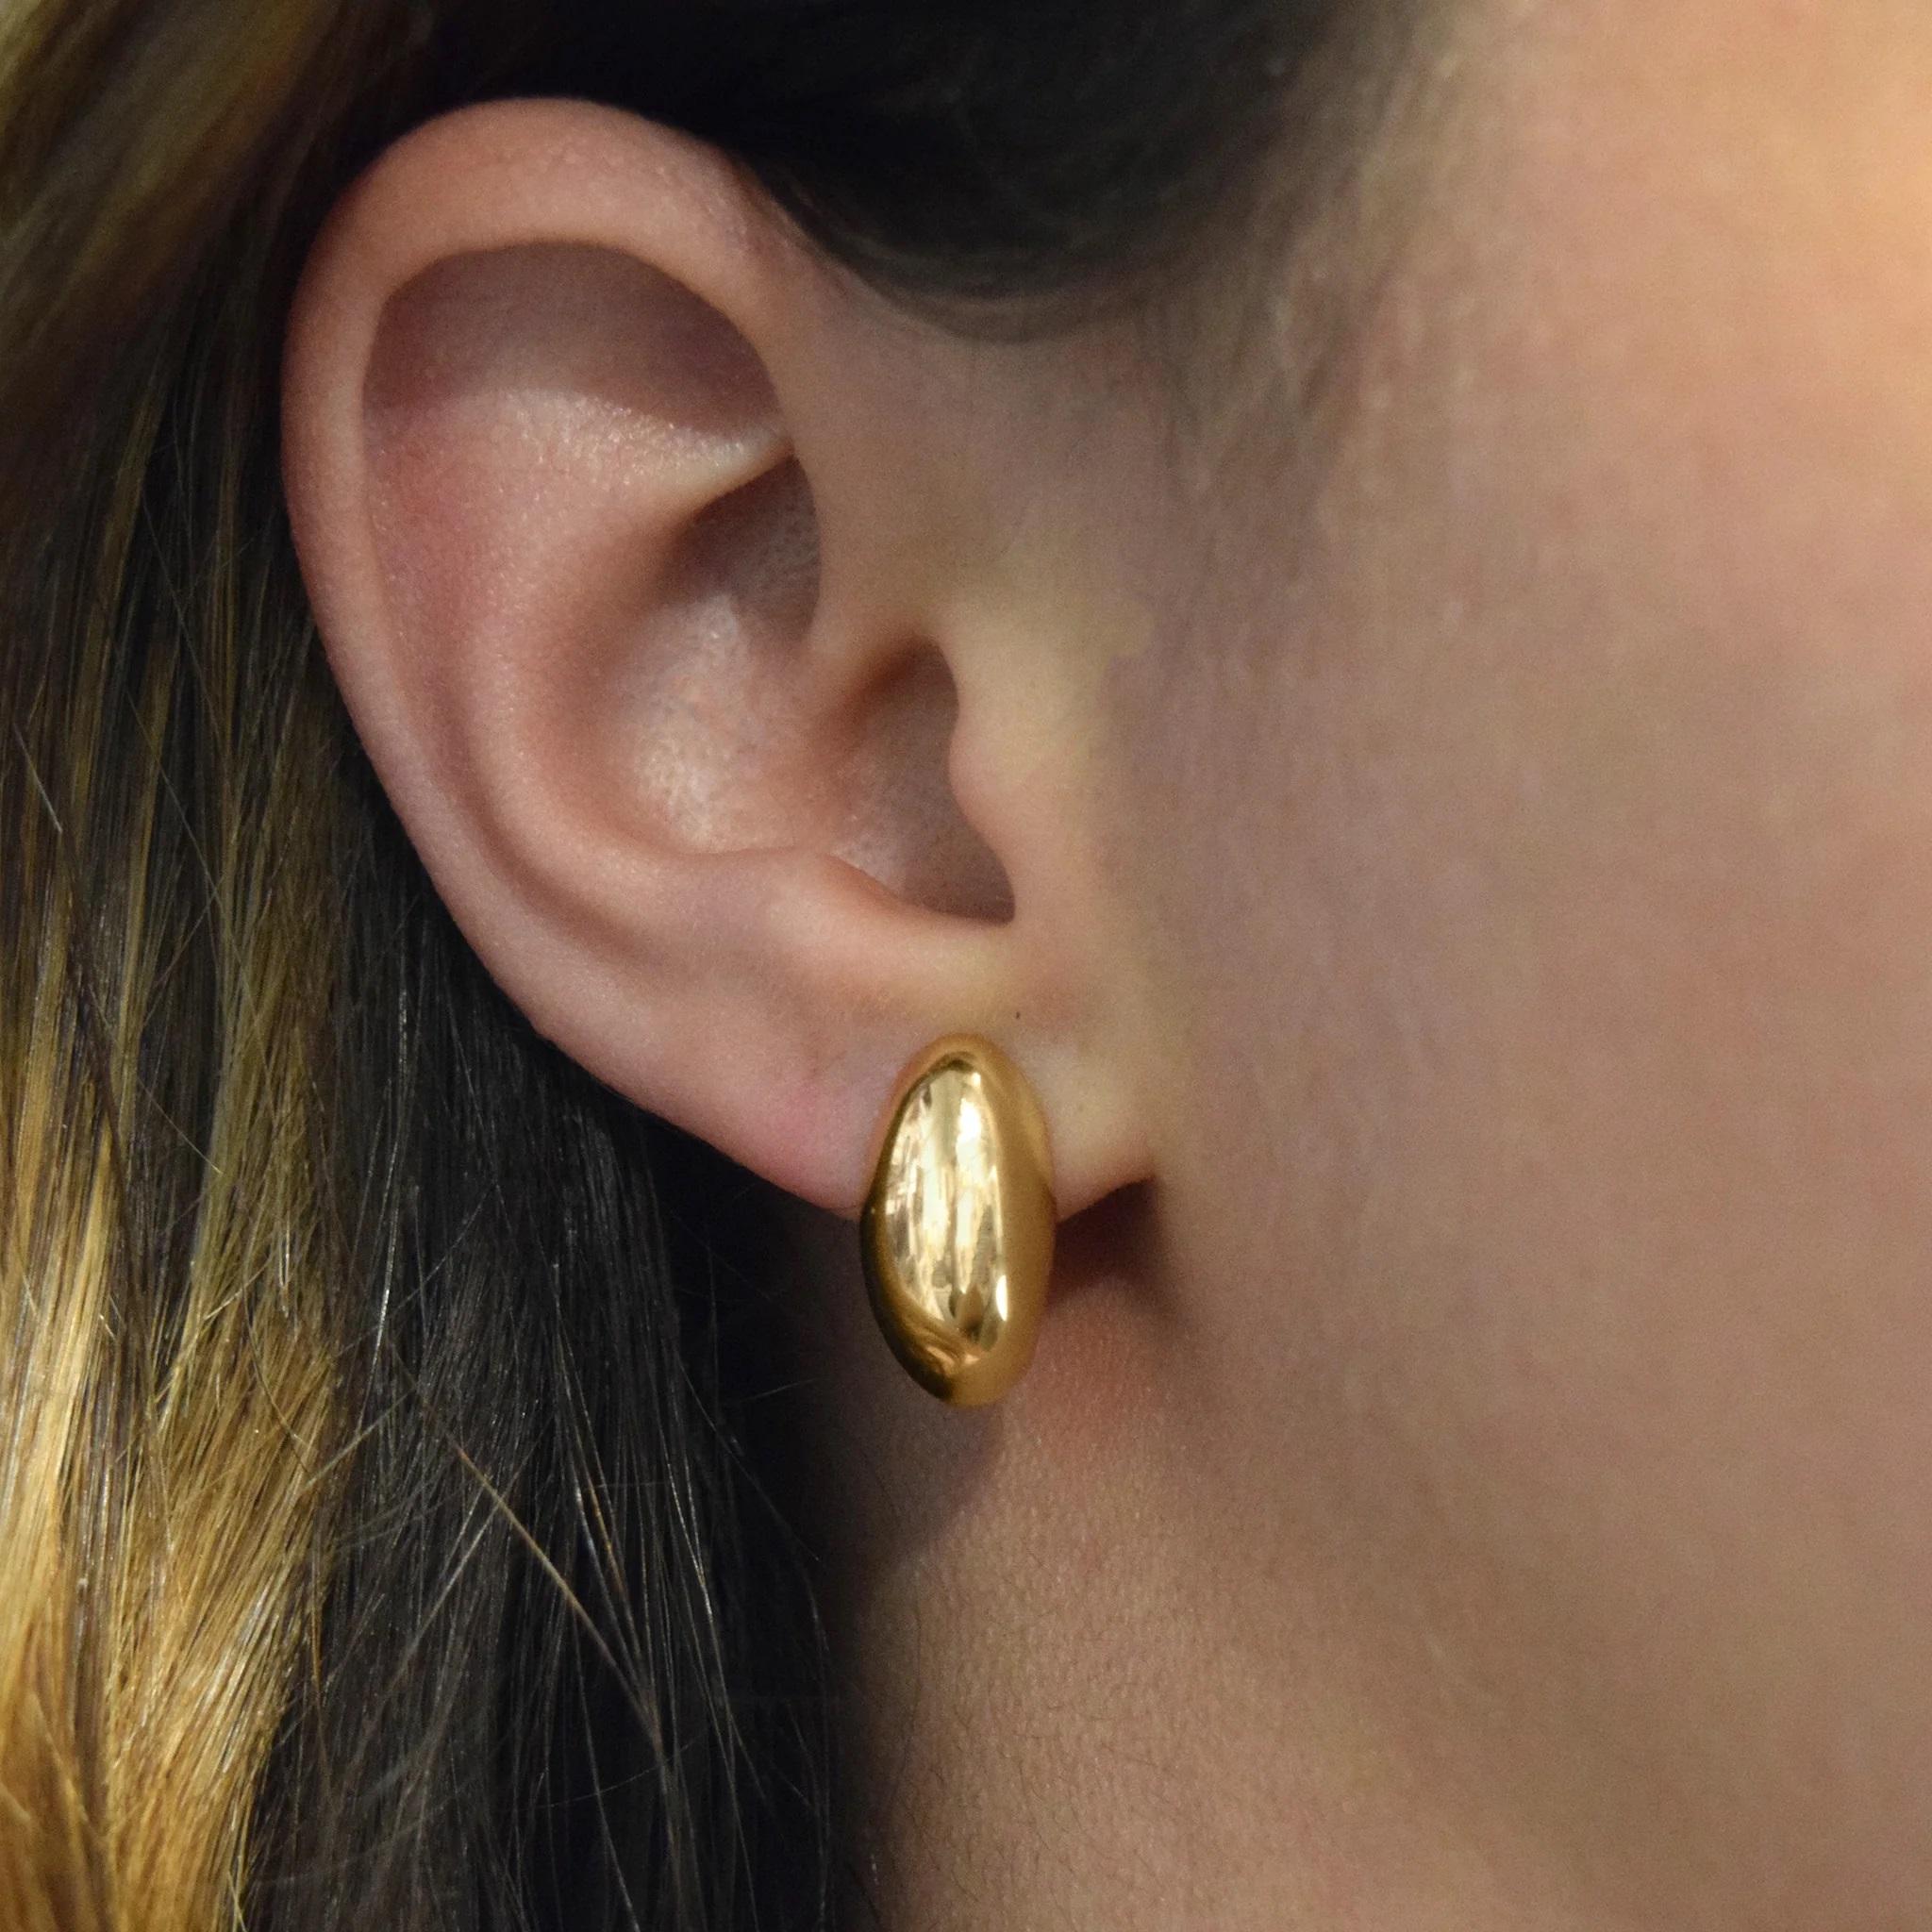 Why perseverance? Because fish only swim forward. After all, what's the point in looking back. The Iconic Monica Rich Kosann Perseverance Fish Design inspired the Sculptural Silhouette of these 18k Gold huggie earrings. They are a contemporary,